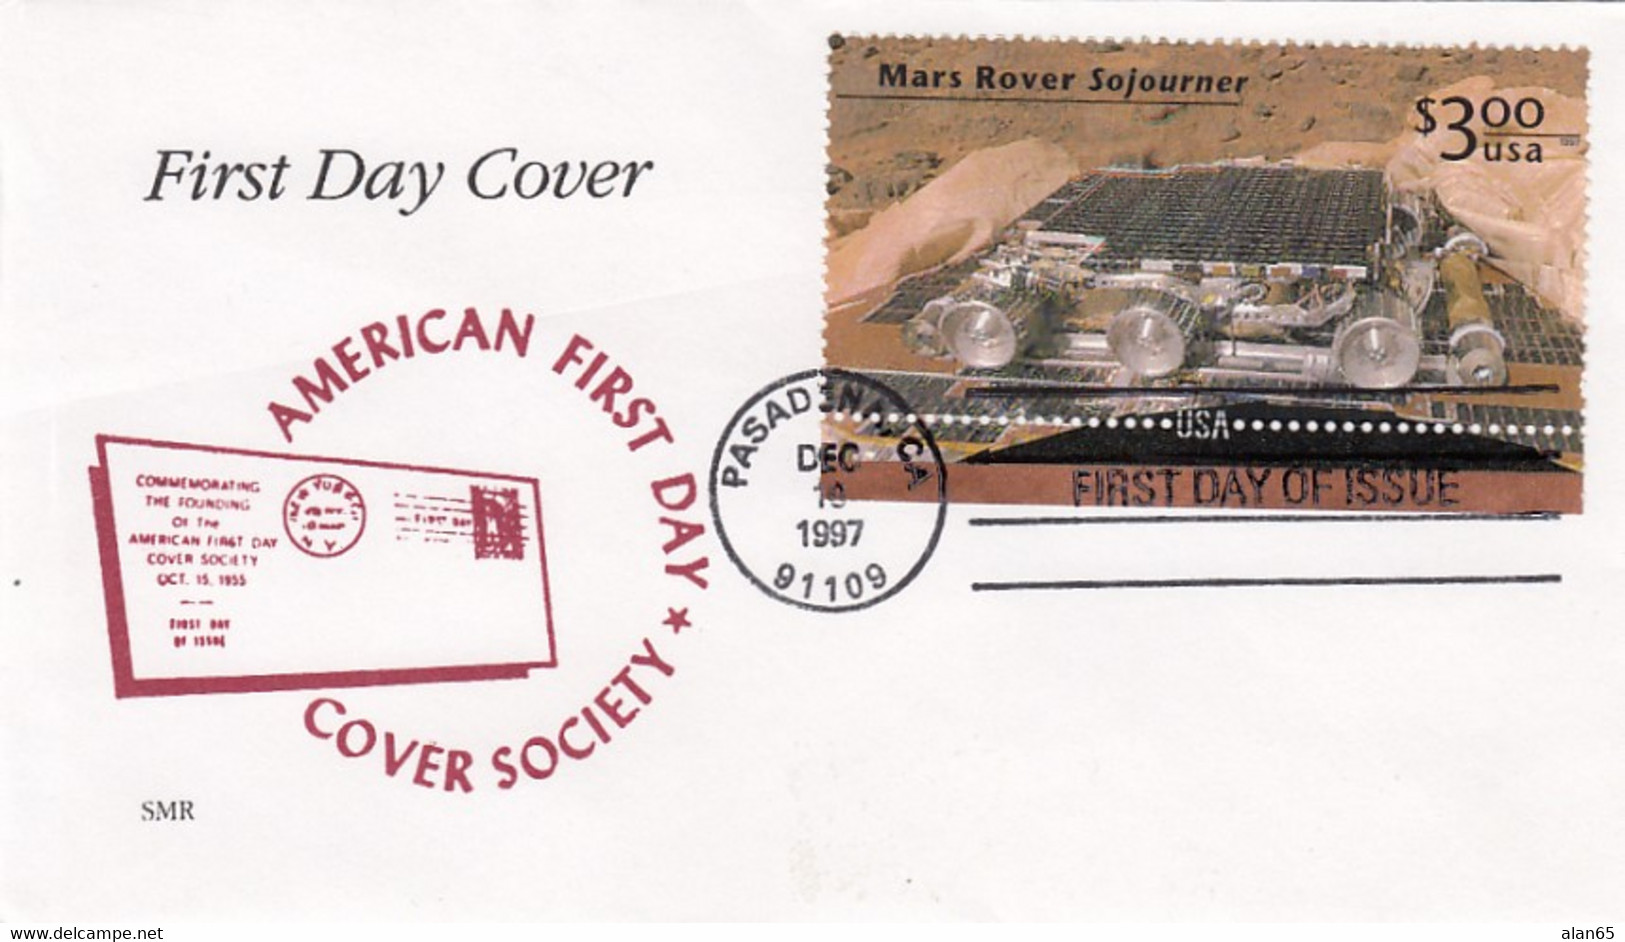 Sc#3178, $3.00 Mars Pathfinder Souvenir Sheet Issue, First Day Cover, Space Exploration Theme, 1997 FDC - 1991-2000